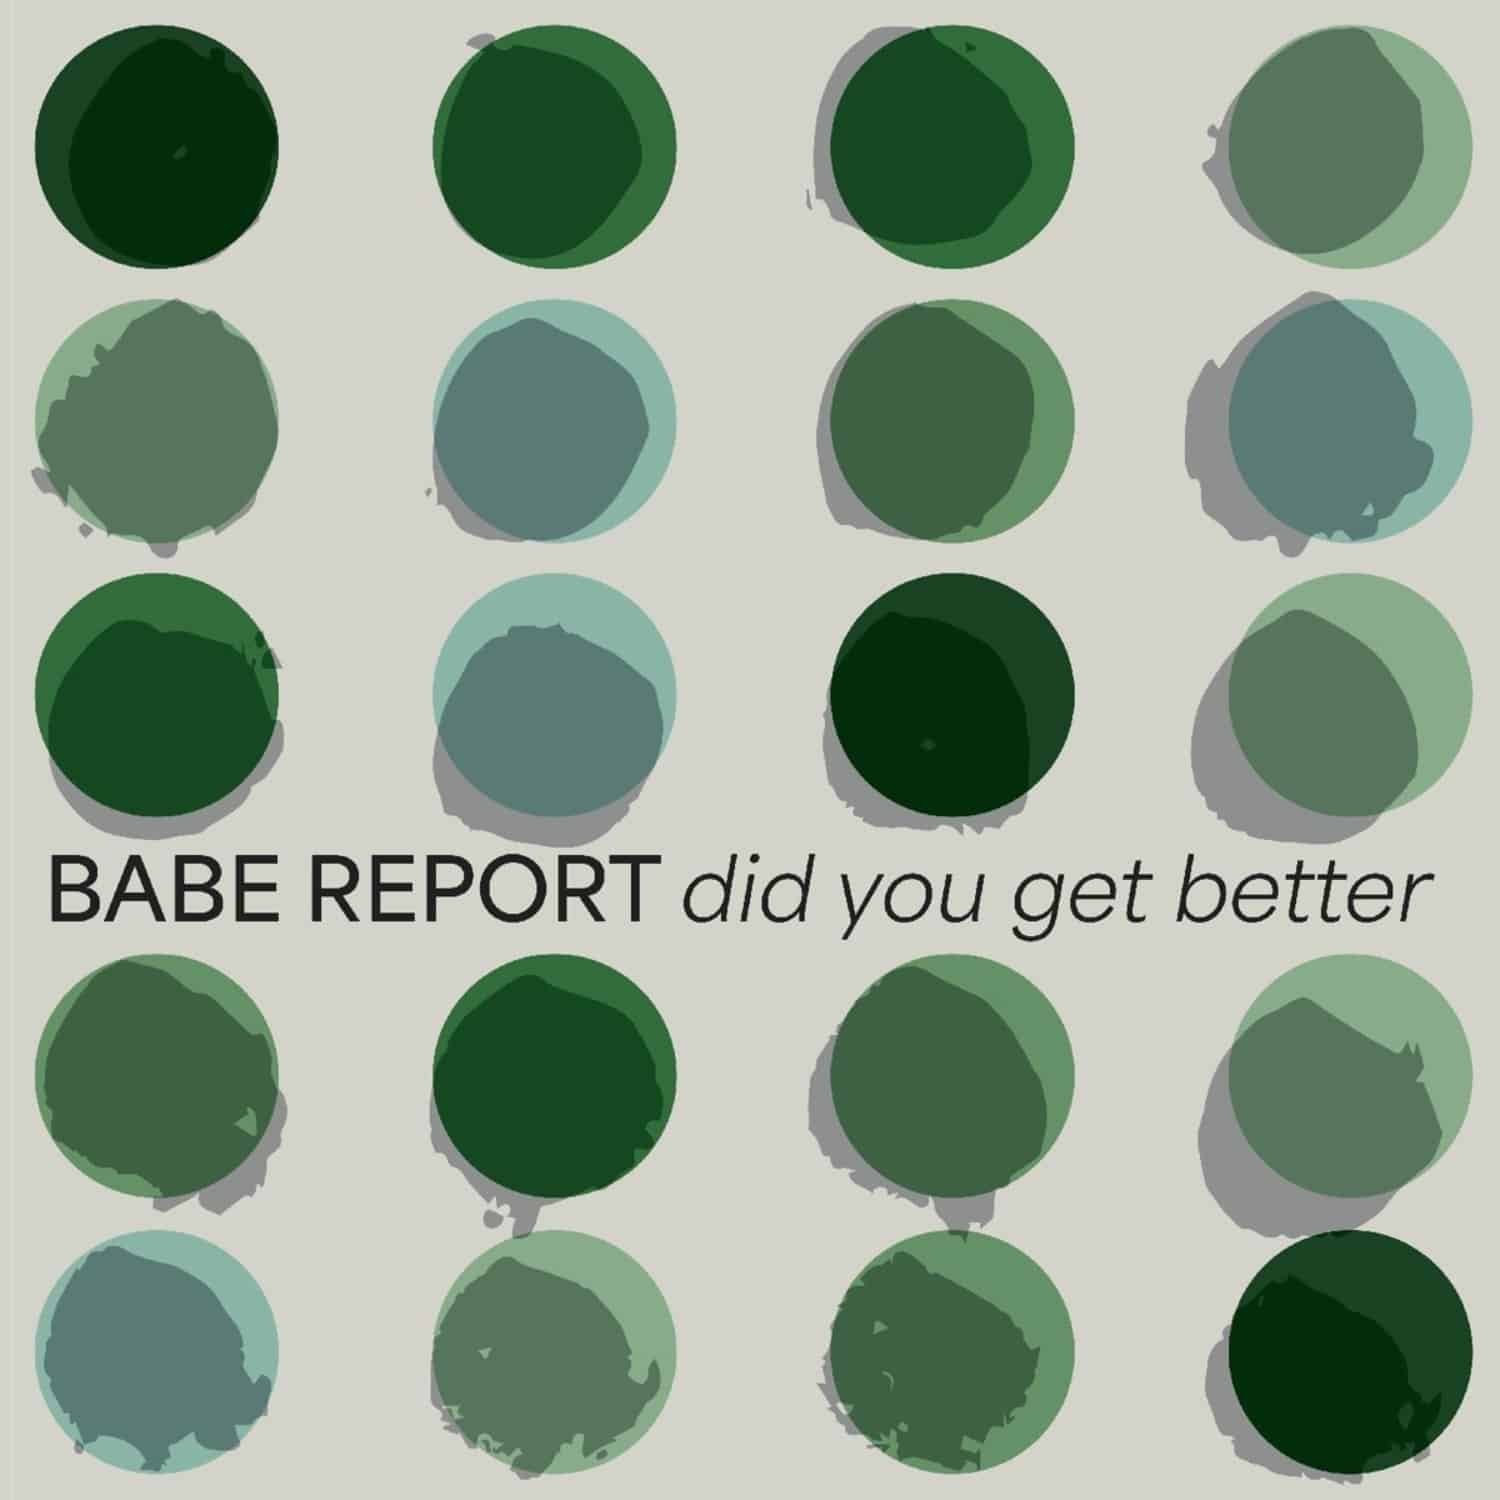 Babe Report - DID YOU GET BETTER 